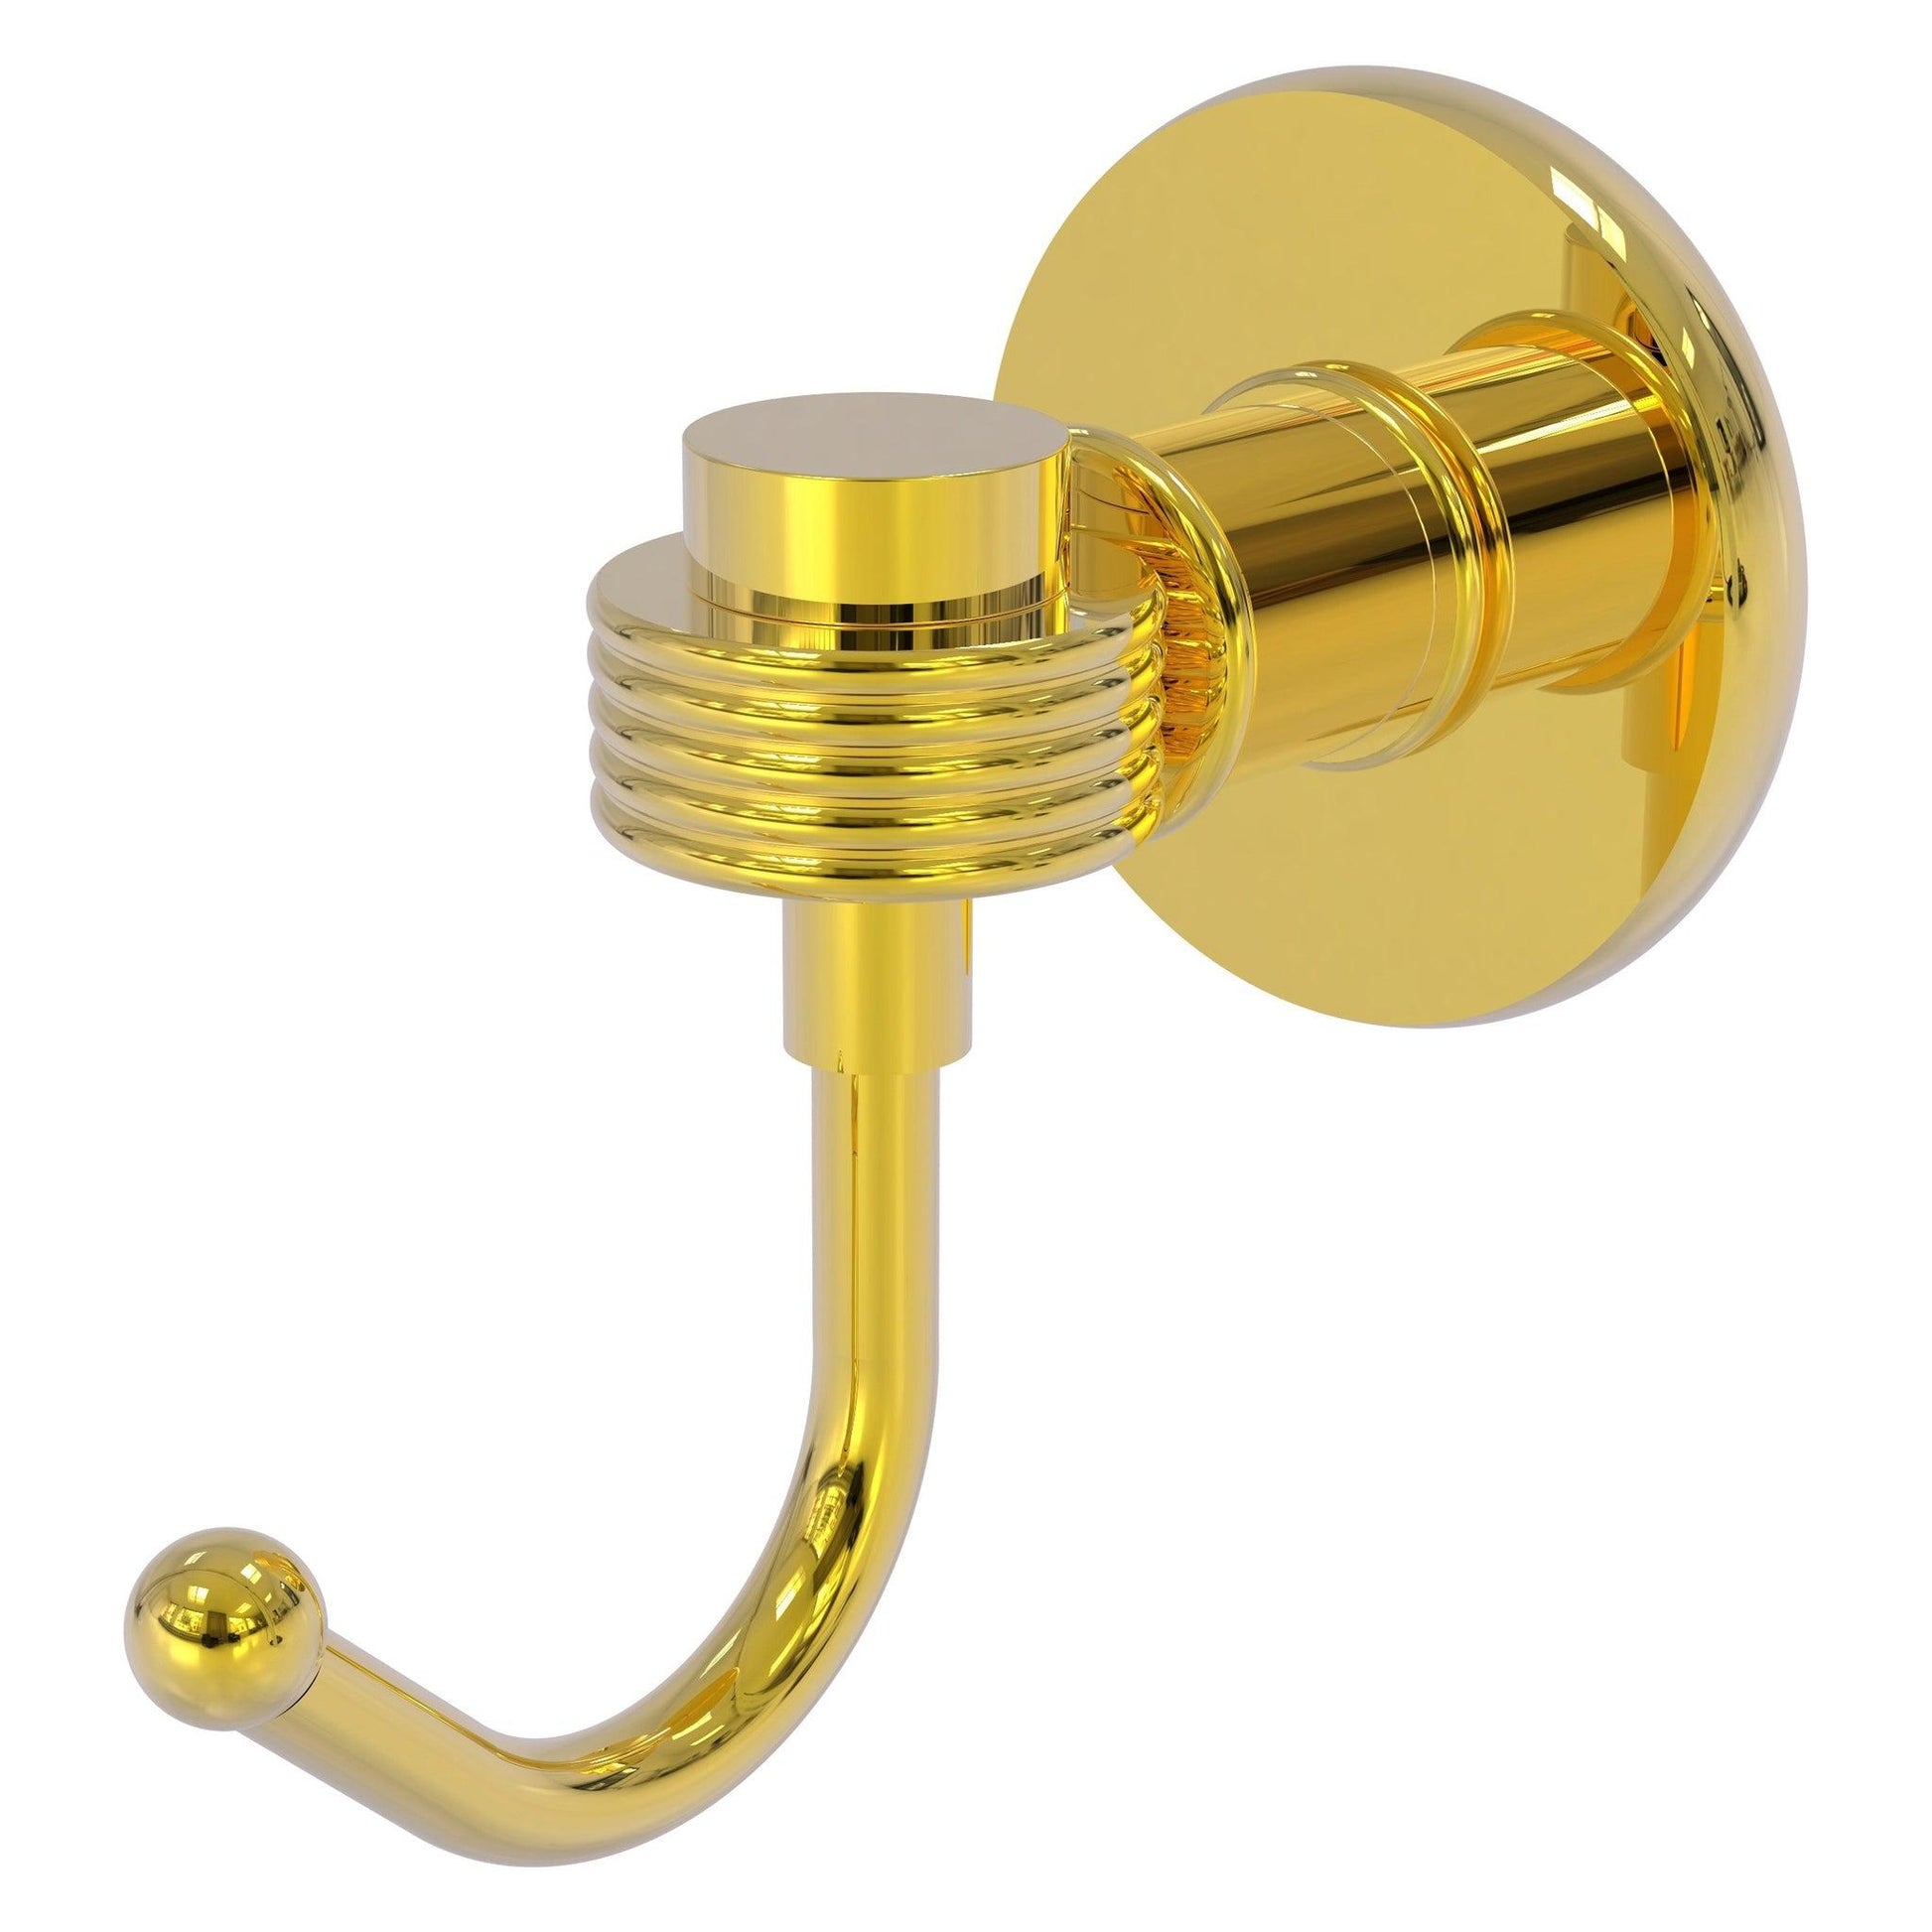 Allied Brass Skyline 2020G 2.8" x 4.77" Polished Brass Solid Brass Robe Hook With Grooved Accents